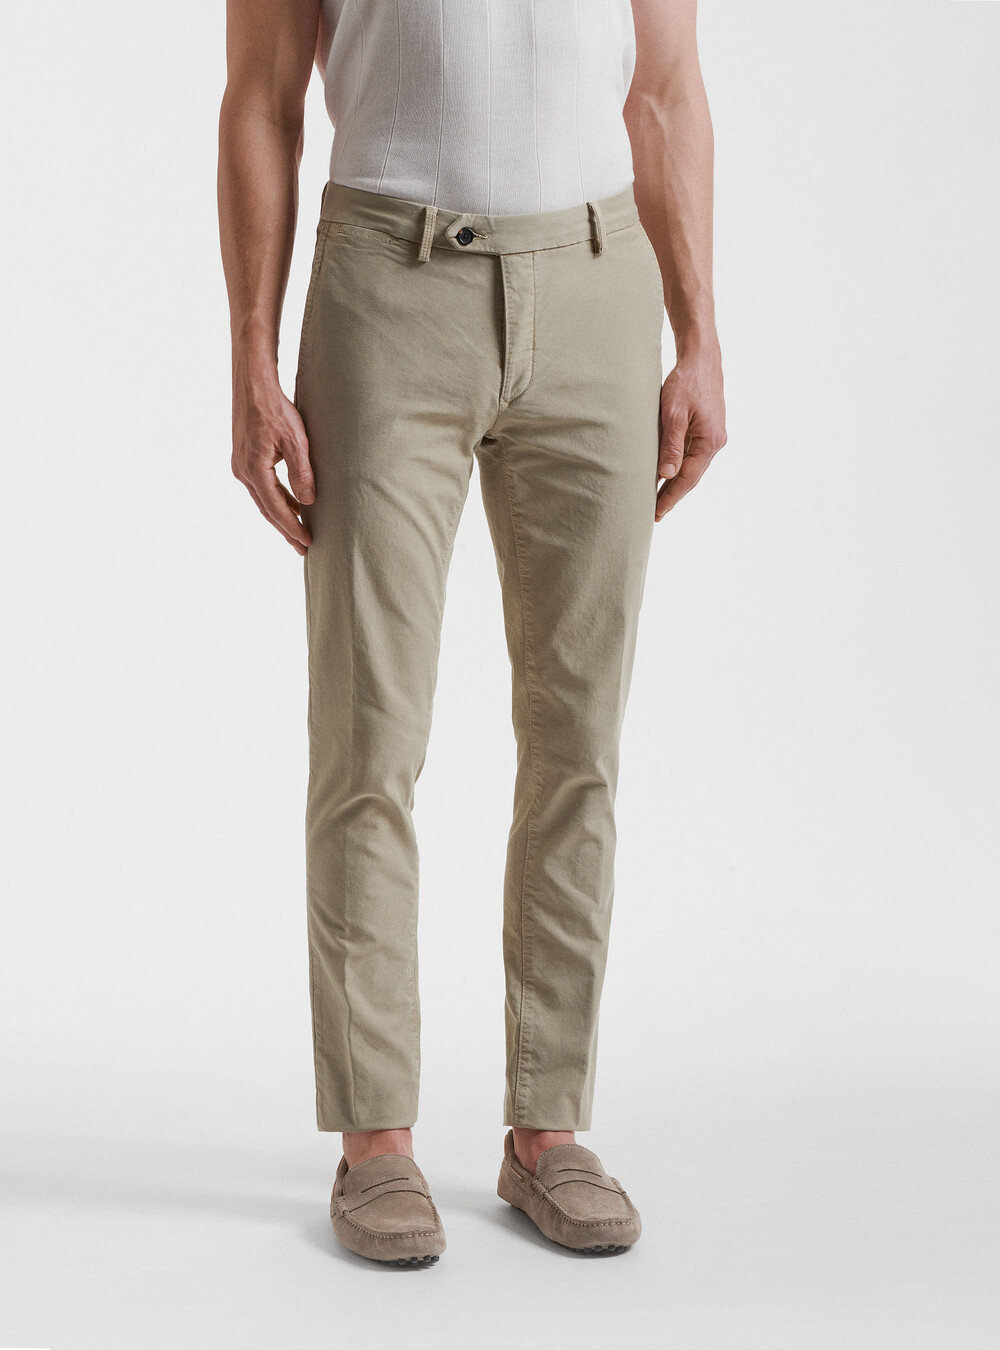 Garment dyed stretch cotton slim fit chino trousers